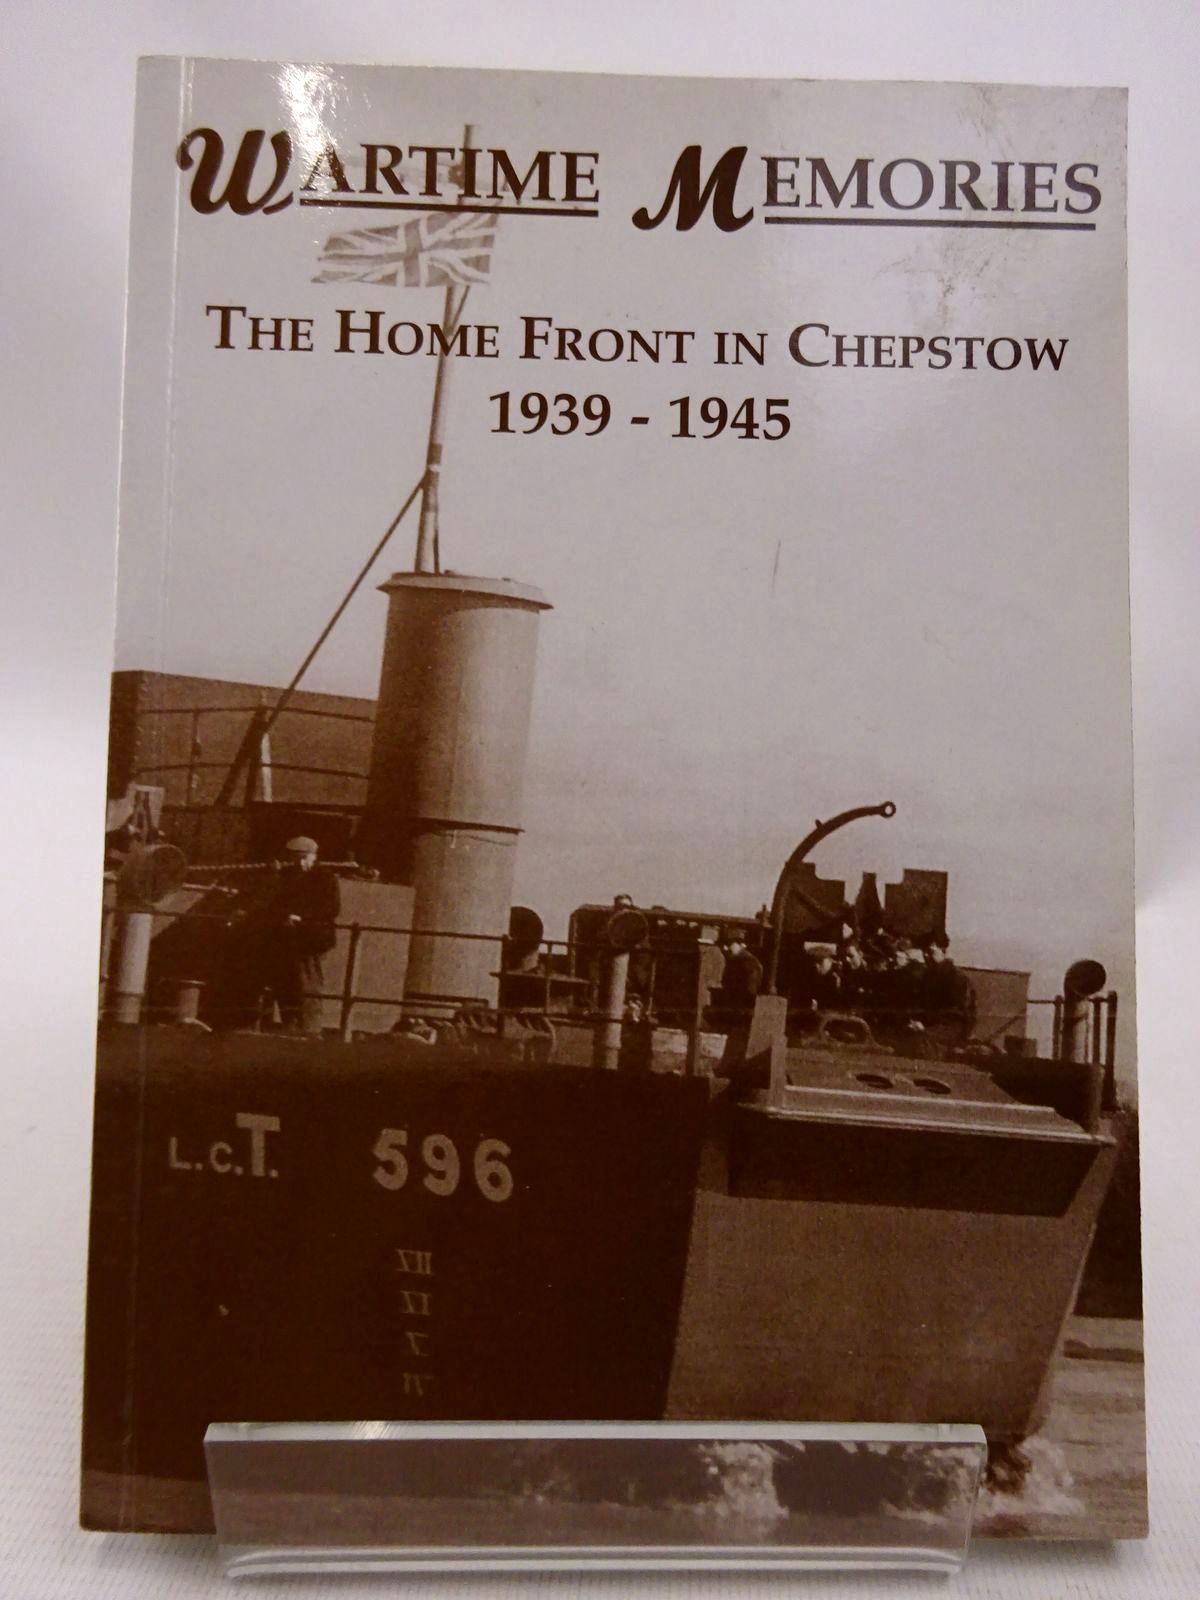 Photo of WARTIME MEMORIES: THE HOME FRONT IN CHEPSTOW 1939-1945 published by The Chepstow Society (STOCK CODE: 1815788)  for sale by Stella & Rose's Books